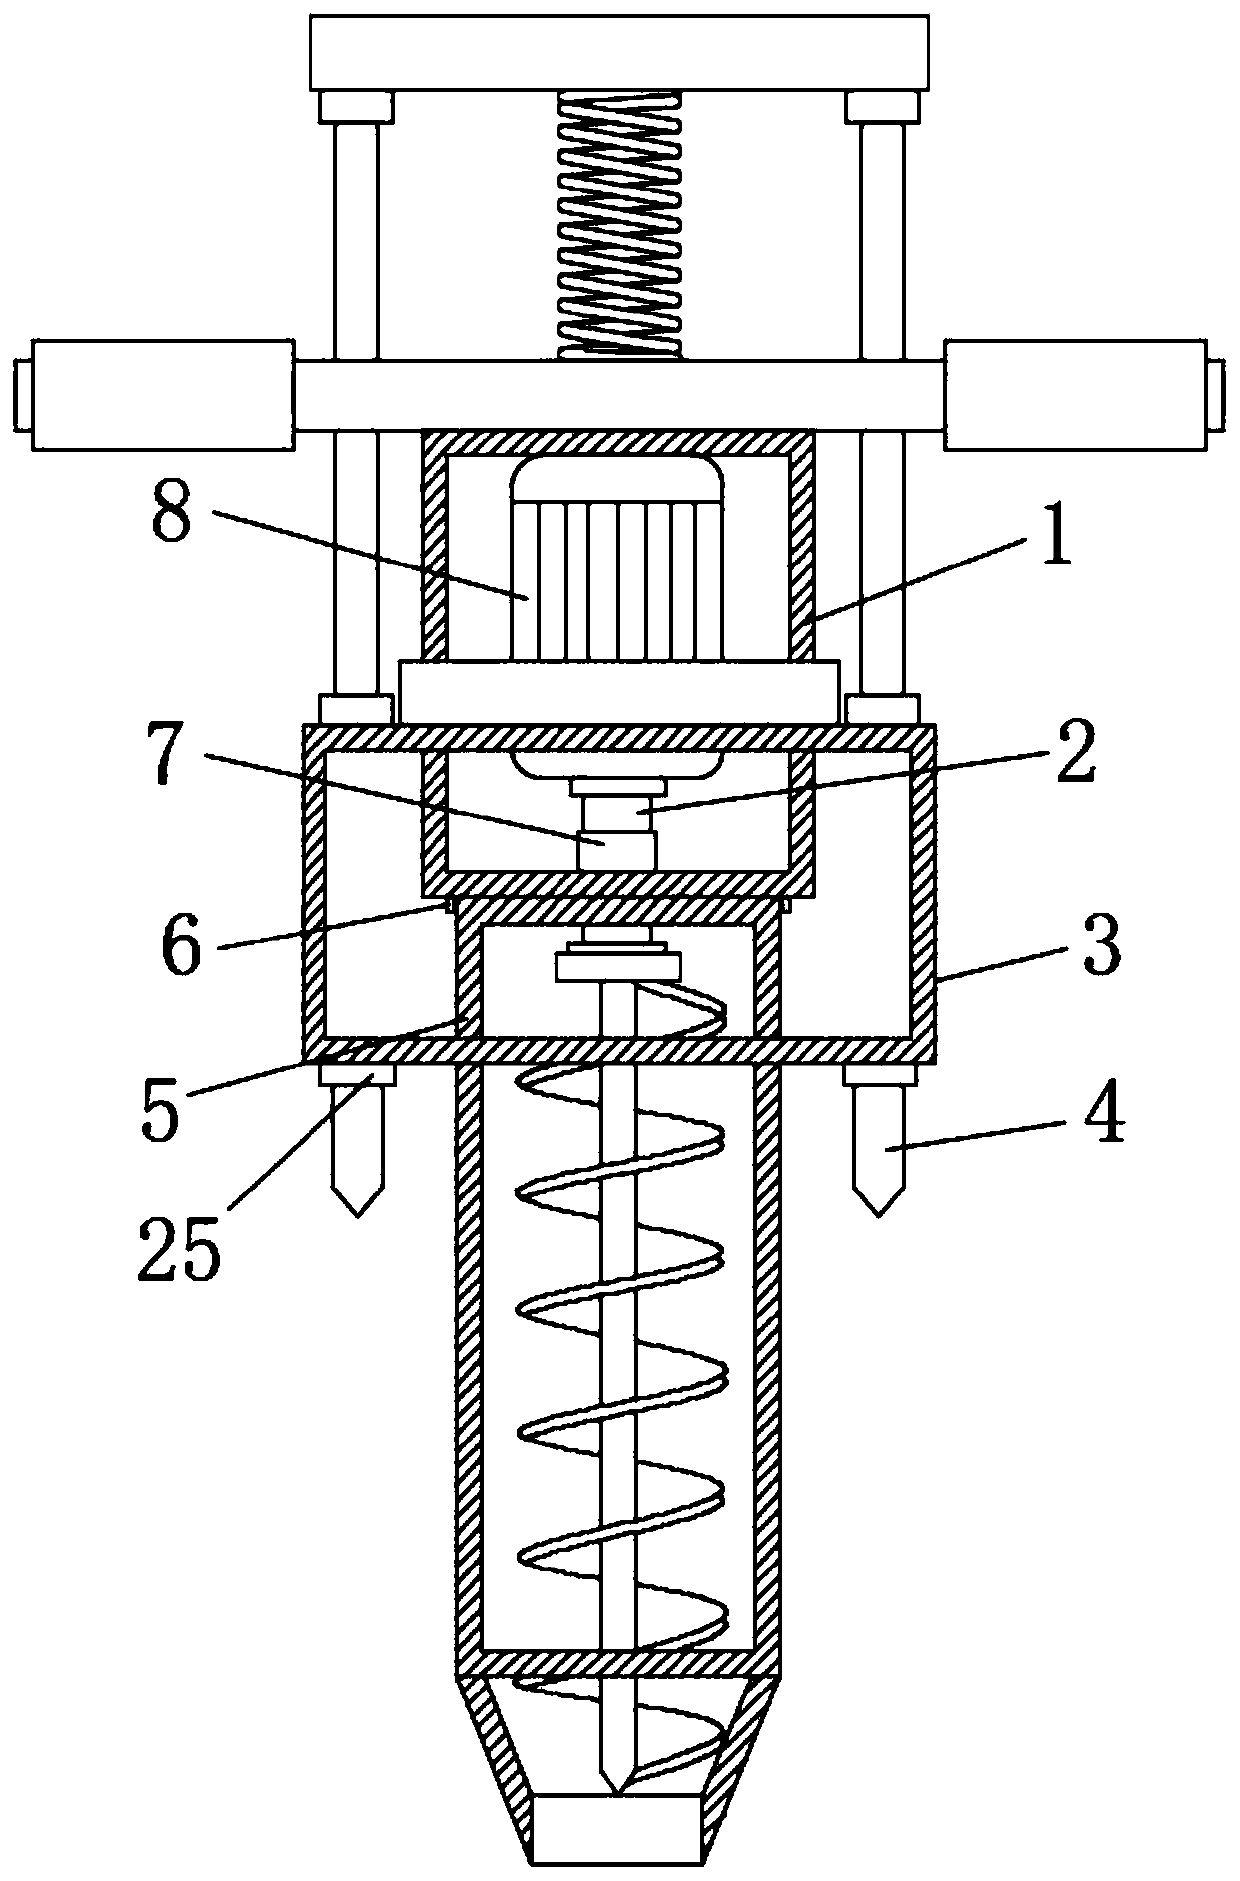 Soil sampling device for constructional engineering